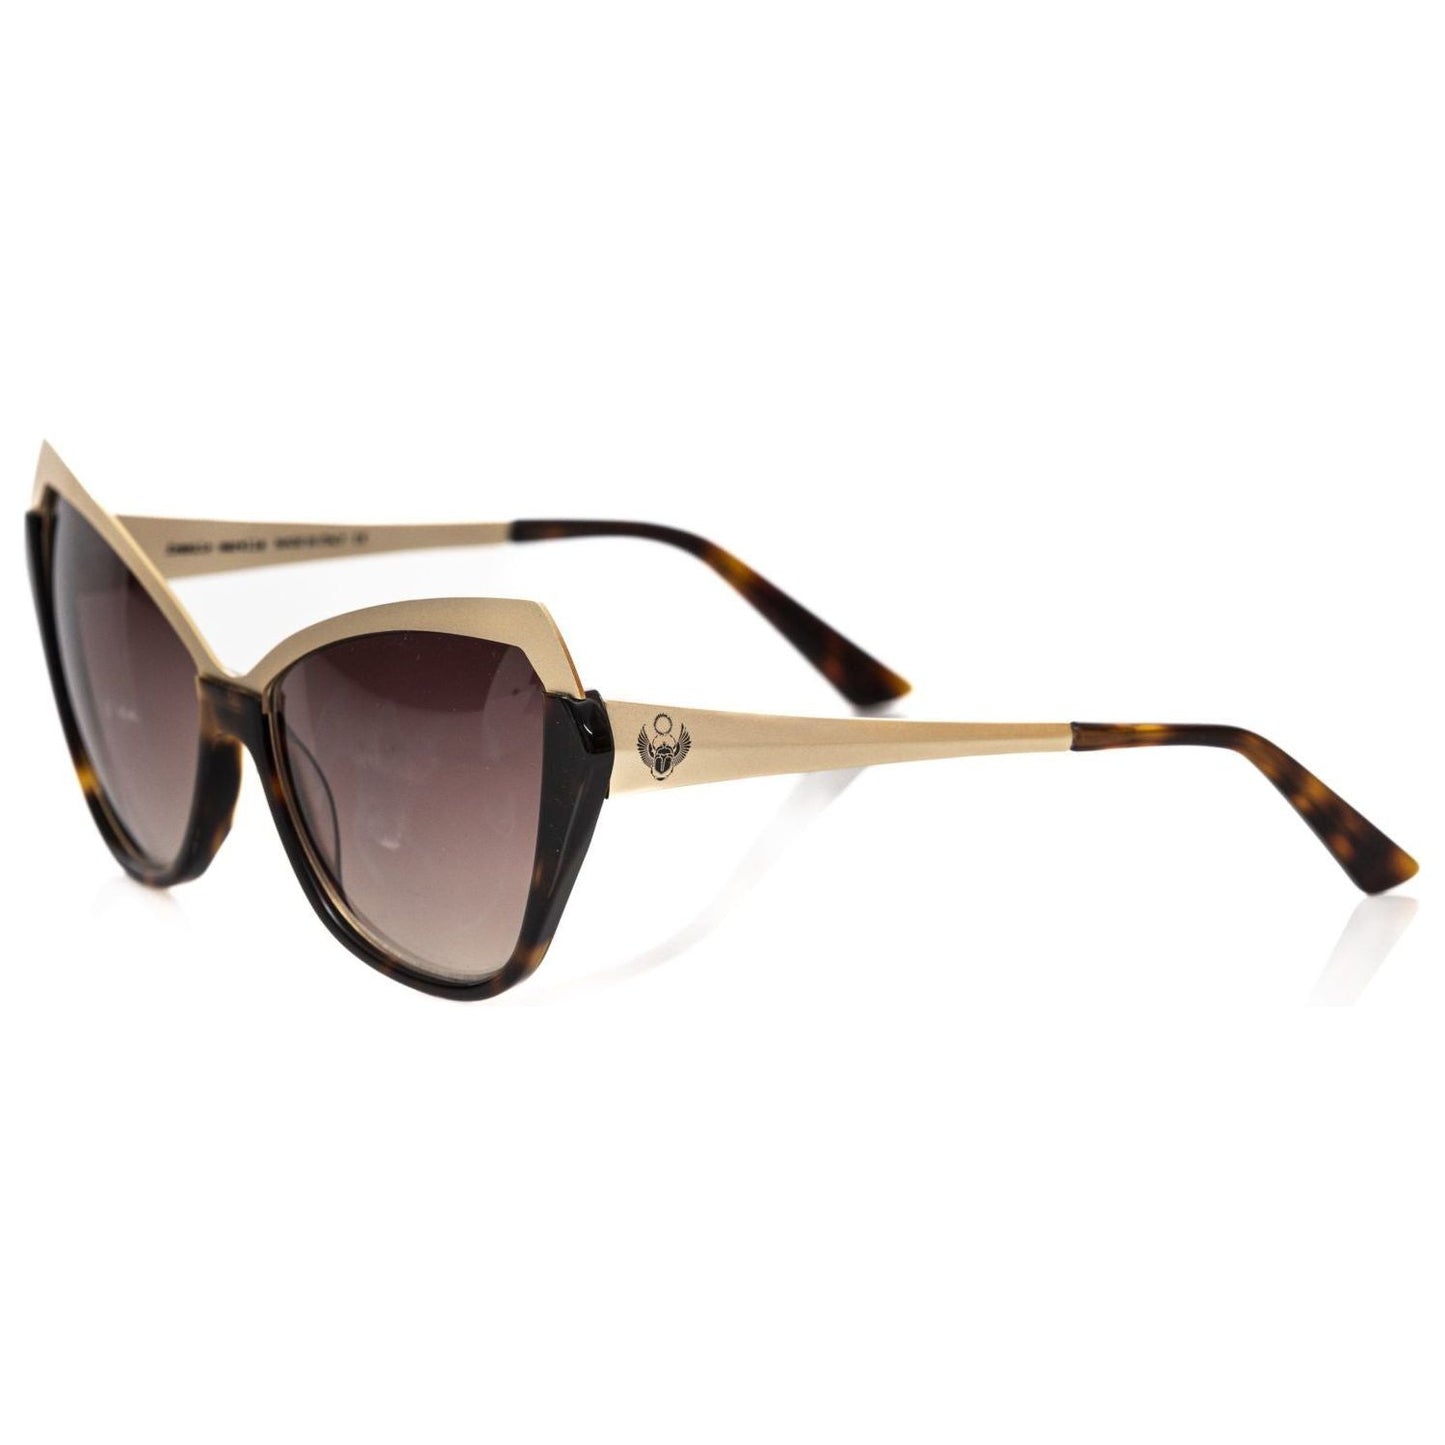 Frankie Morello Chic Cat Eye Sunglasses with Gold Accents black-acetate-sunglasses-1